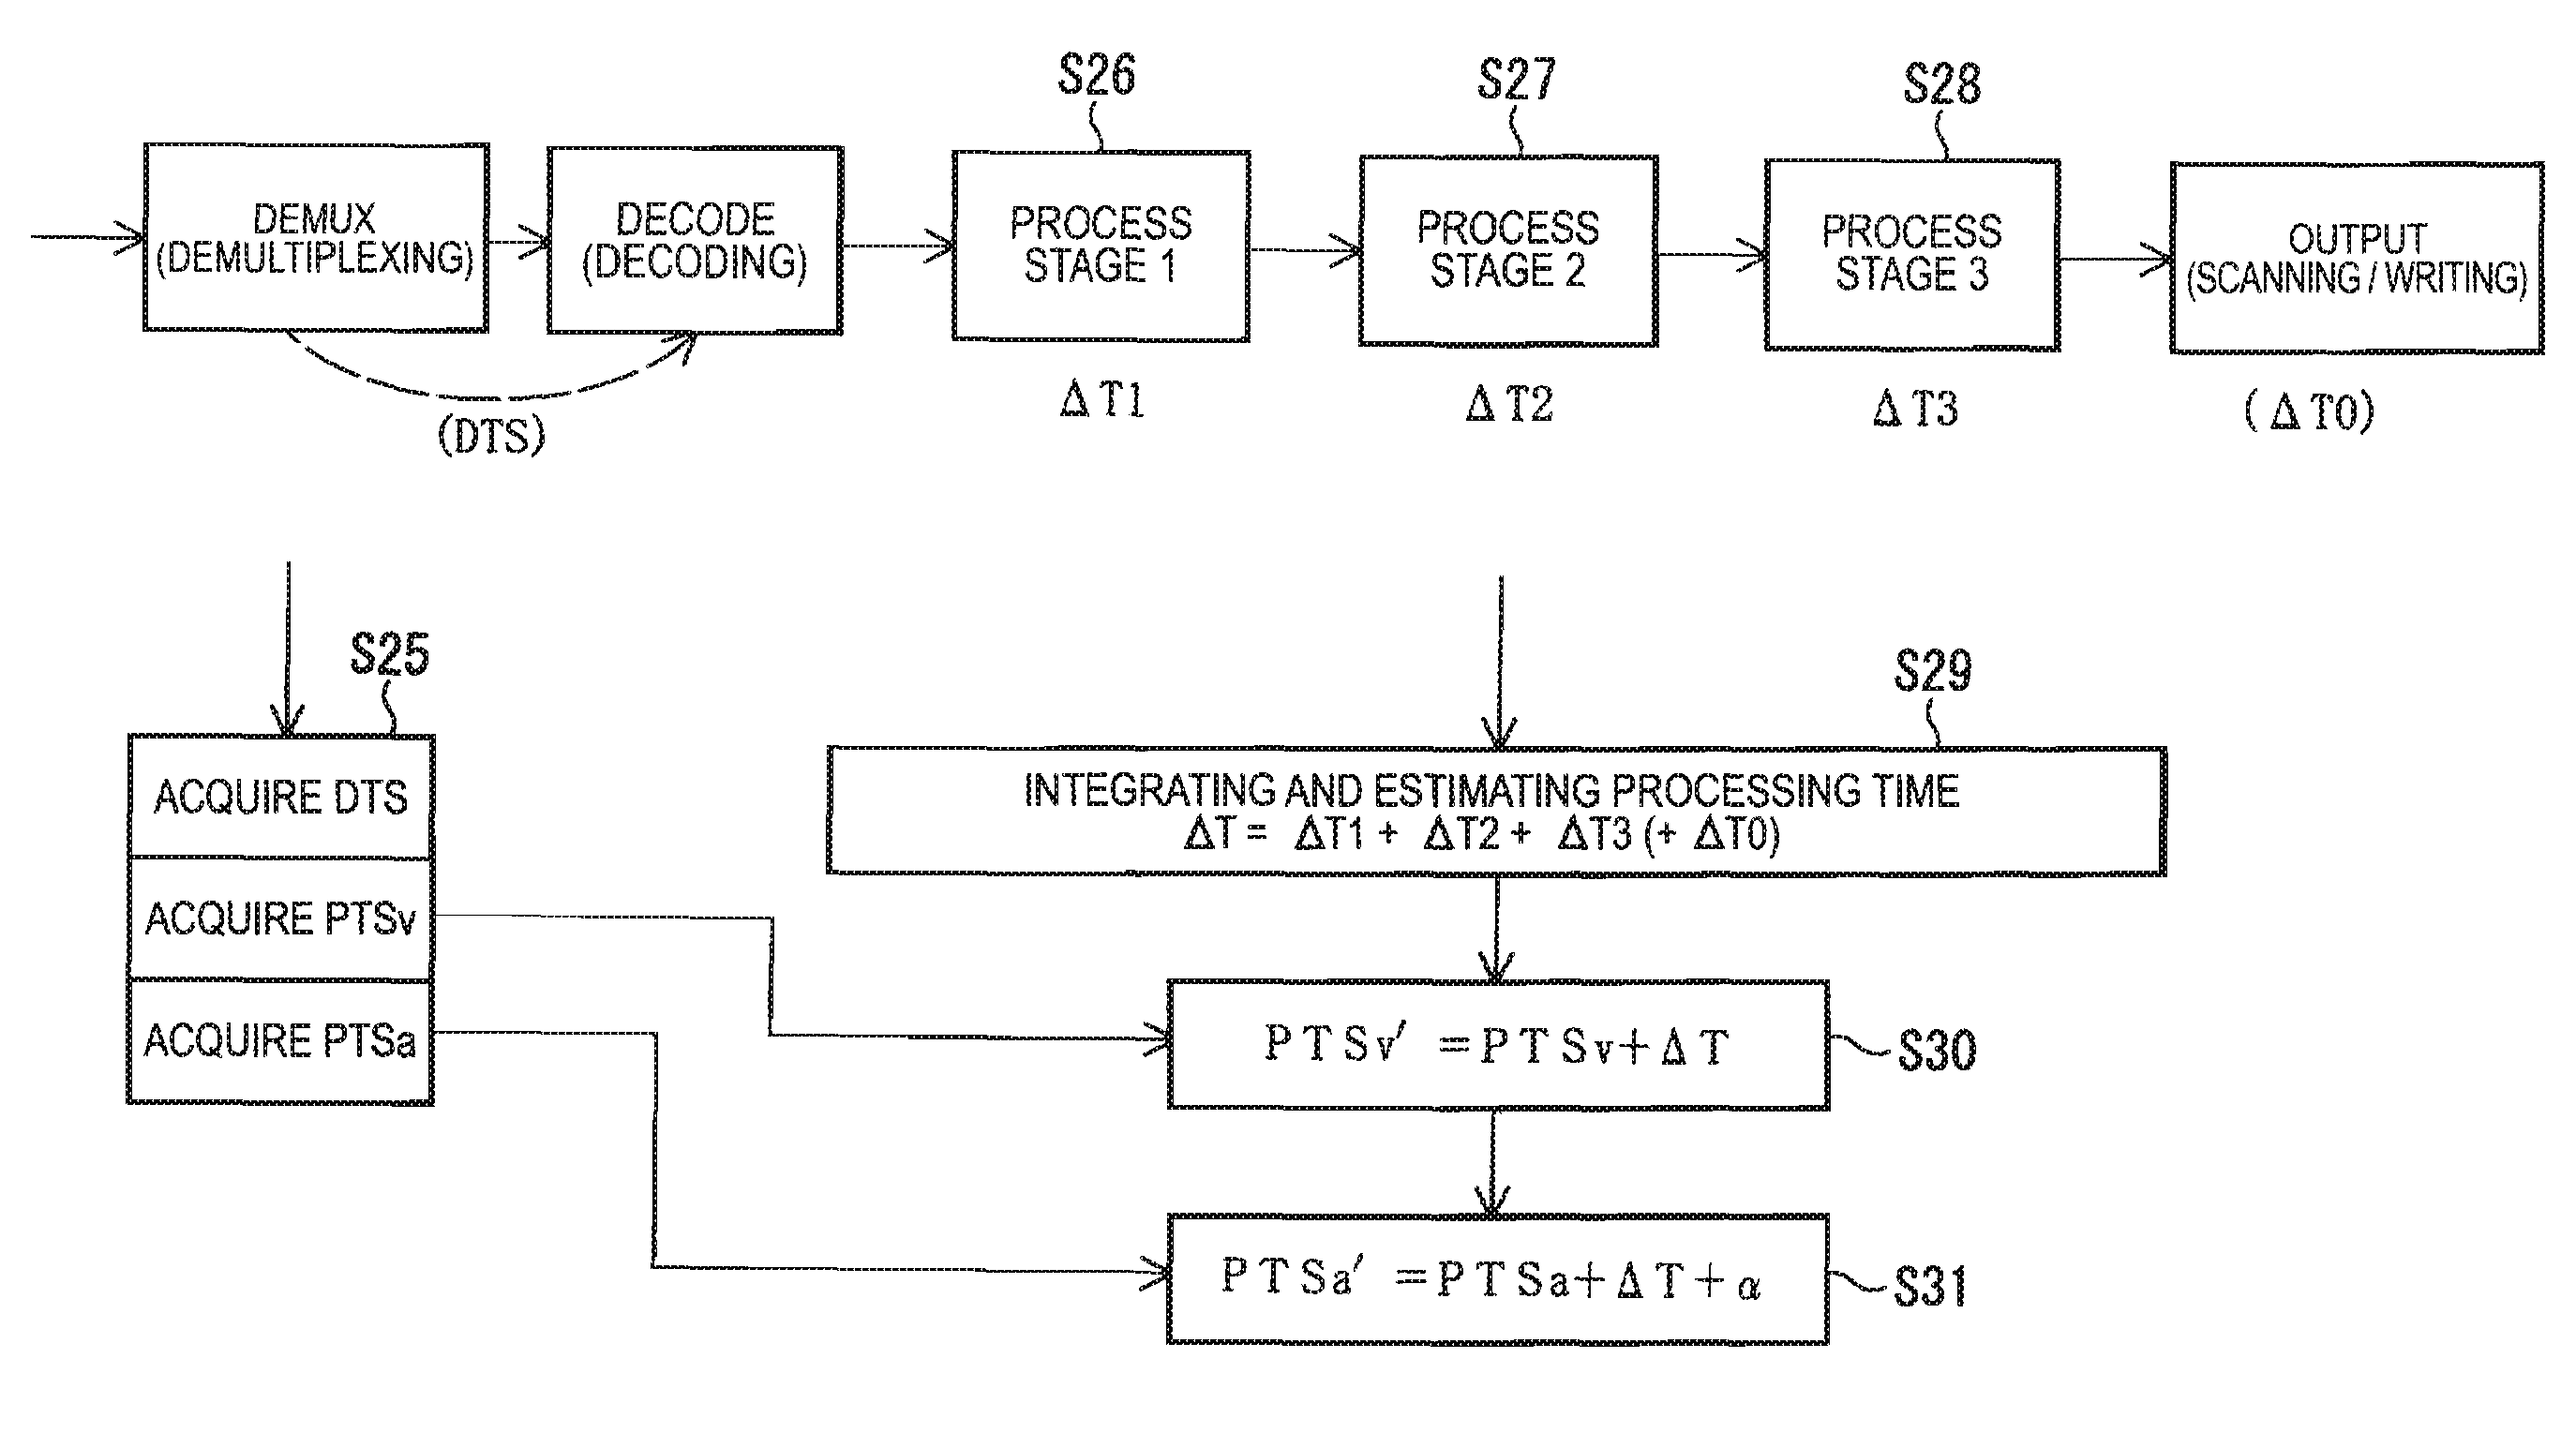 Image and sound output system, image and sound data output device, and recording medium